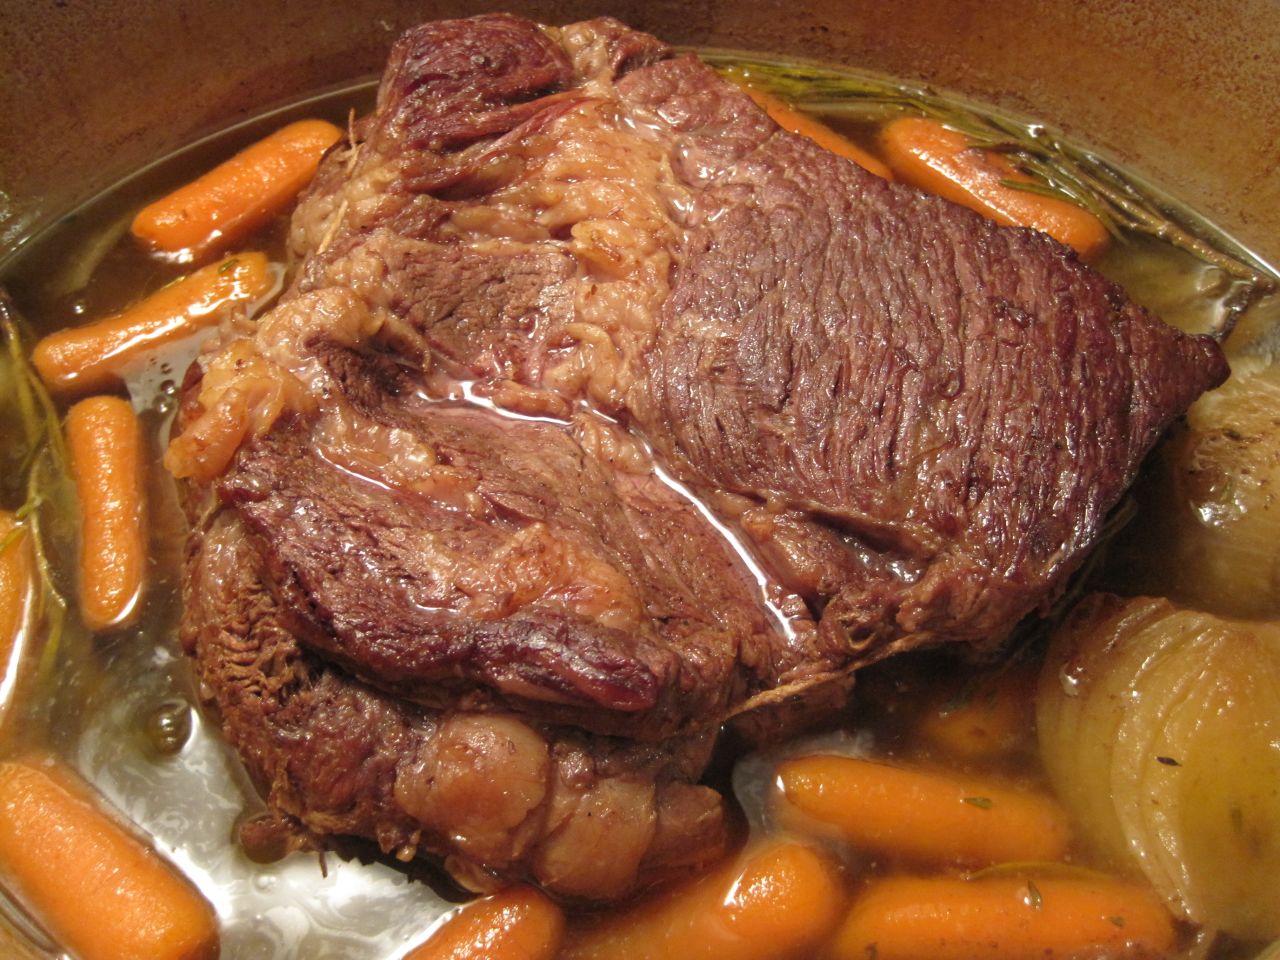 Pot roast | The comfort food that will make you feel all warm and fuzzy inside